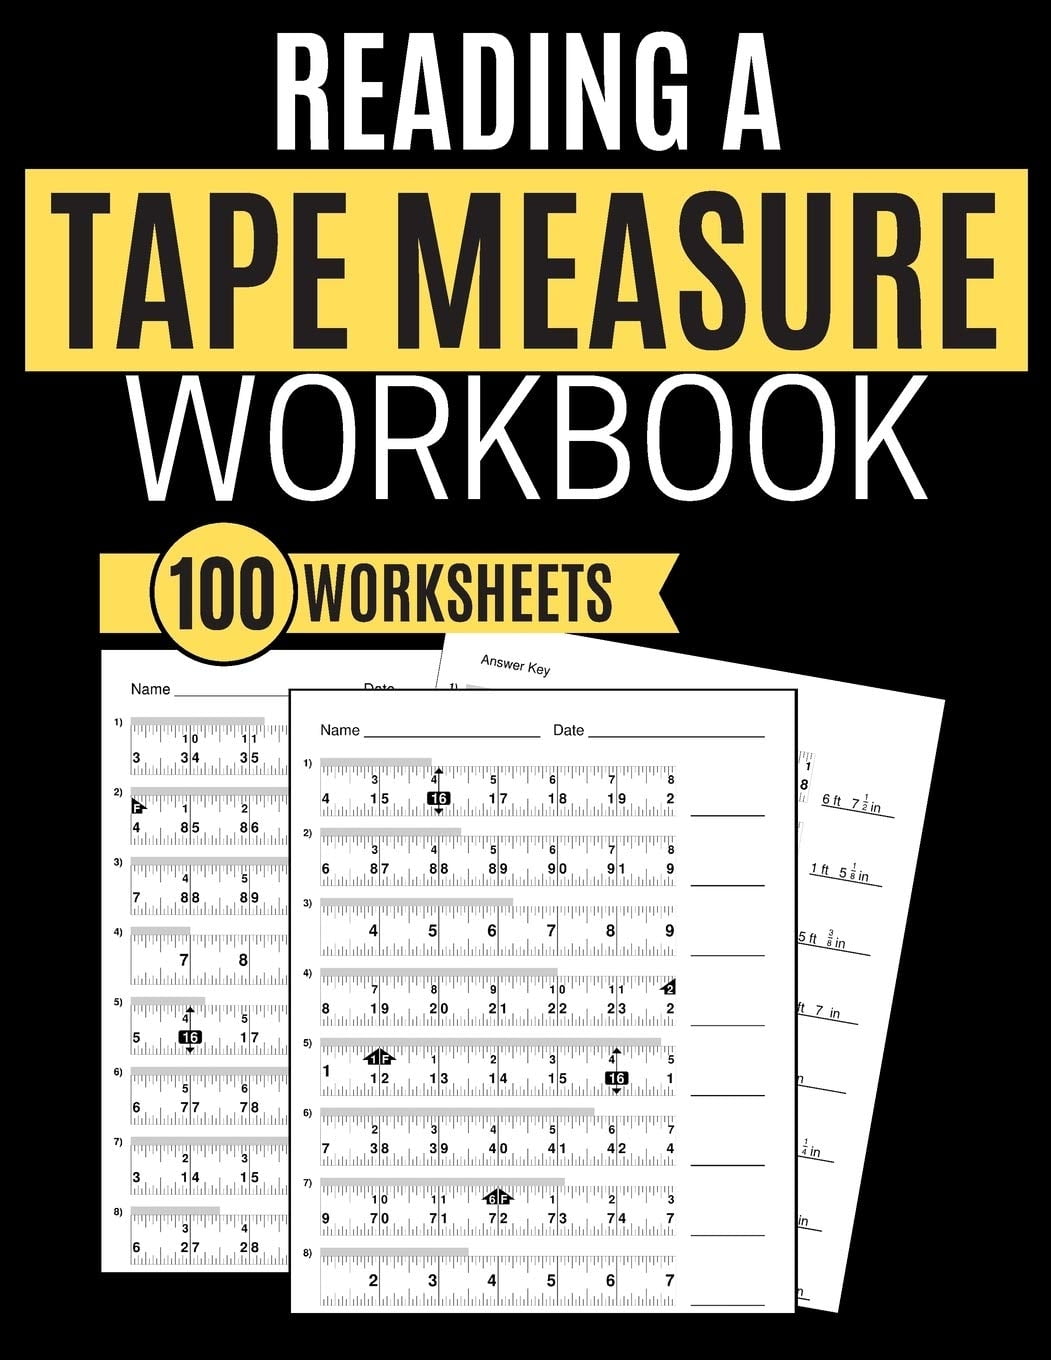 Reading A Tape Measure Workbook 100 Worksheets Learning Kitty 9781705412466 Books Amazon ca